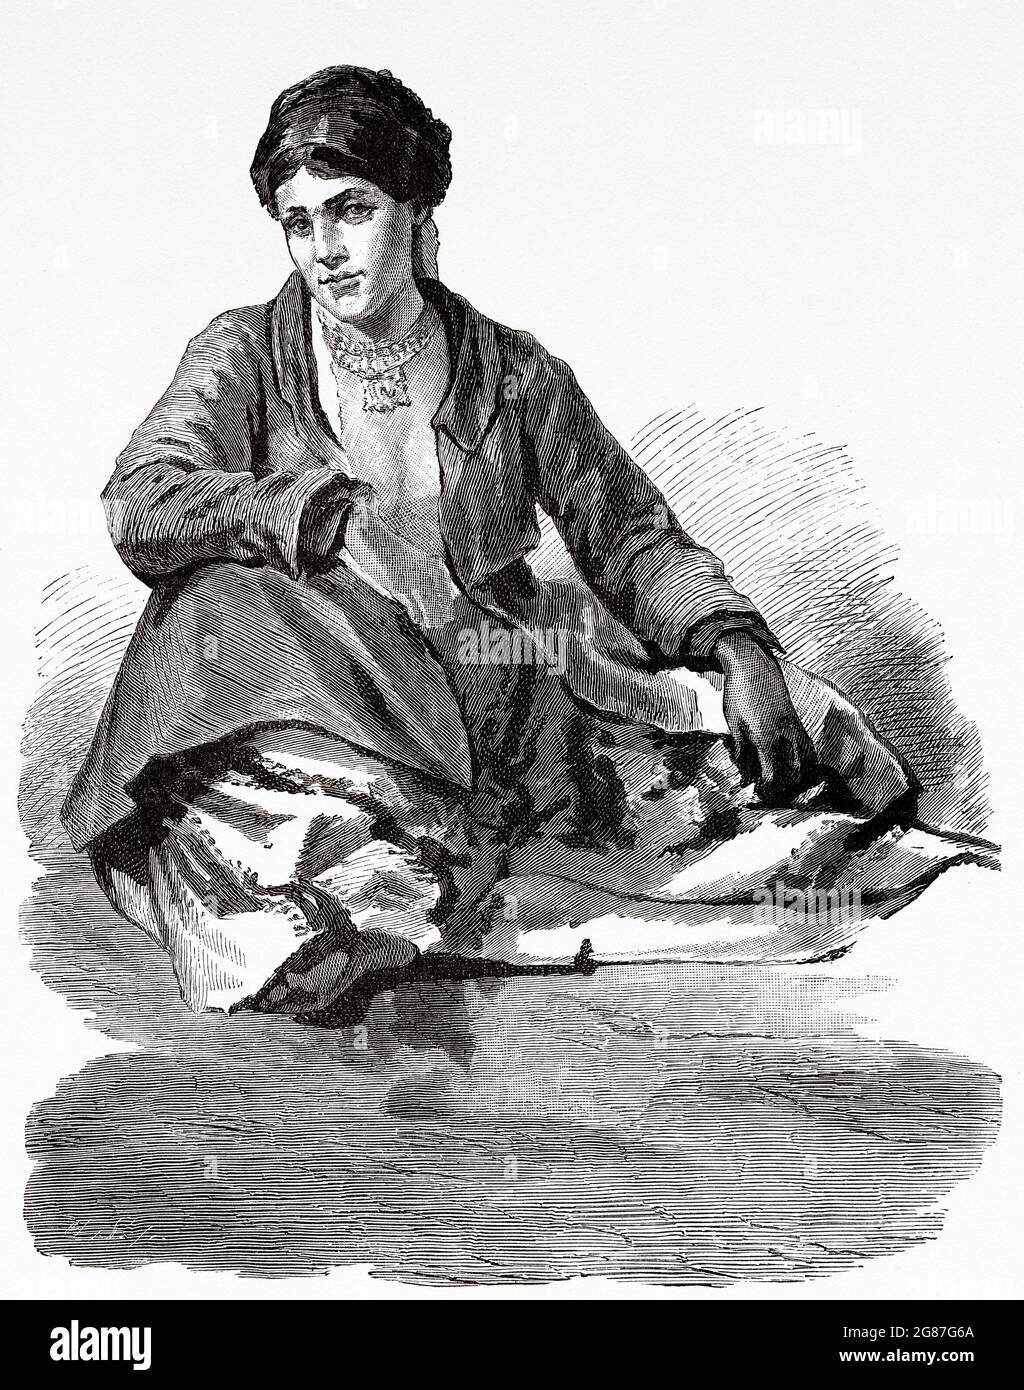 Beautiful 19th century Egyptian woman dressed in typical costumes of the time, Egypt, North Africa. Old 19th century engraved illustration from El Mundo Ilustrado 1880 Stock Photo